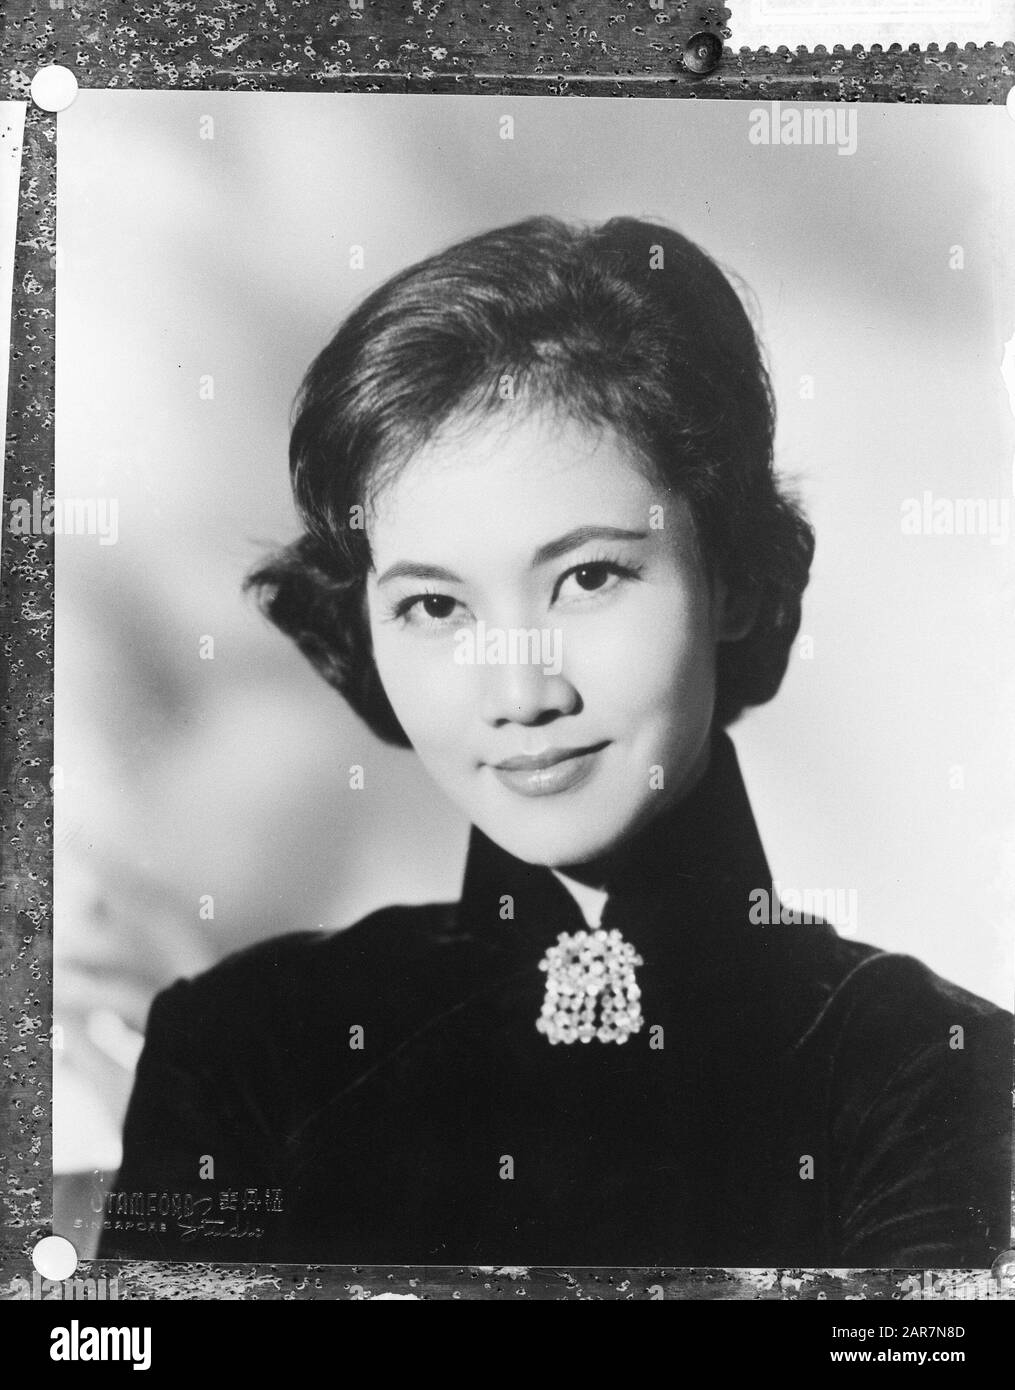 T G V Jet Aircraft Service To Singapore Malay Movie Stars Come To The Netherlands The Movie Star Orchid Wong Date January 6 1961 Location Malaysia Singapore Keywords Movie Stars Personal Name Wong Orchid